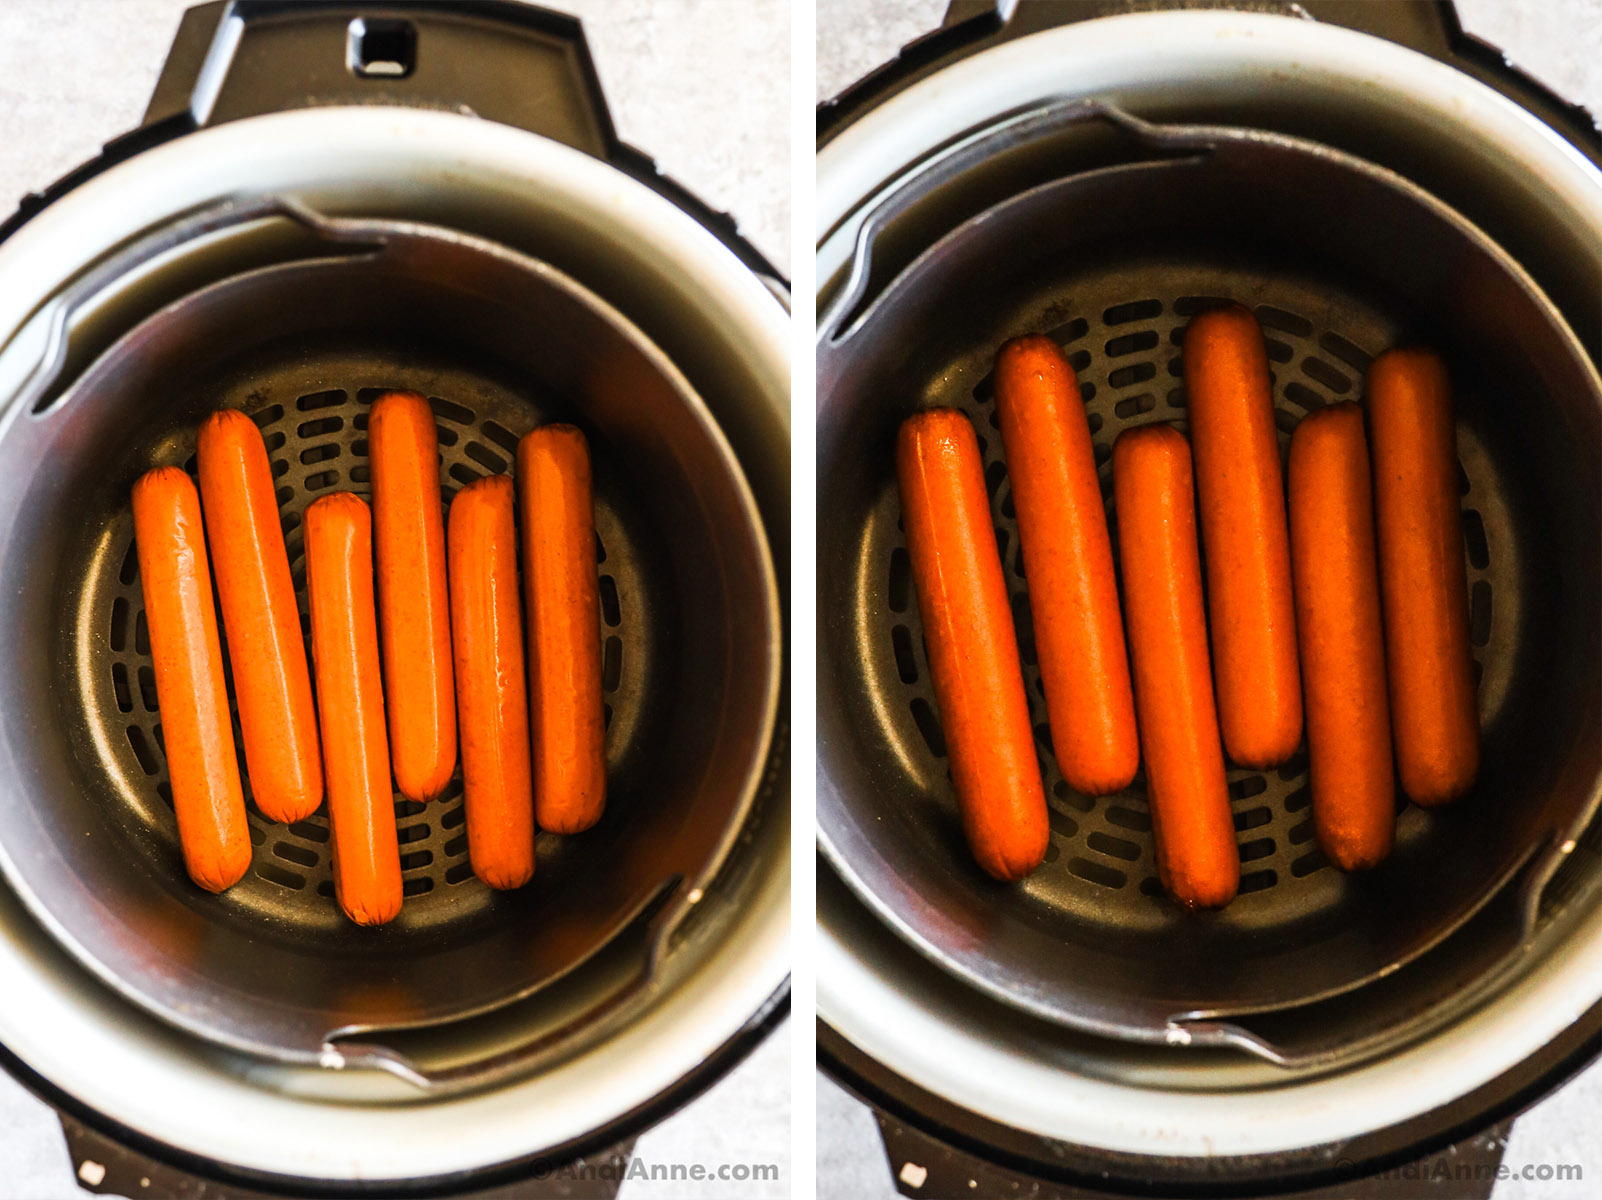 Looking into an air fryer with hot dogs.